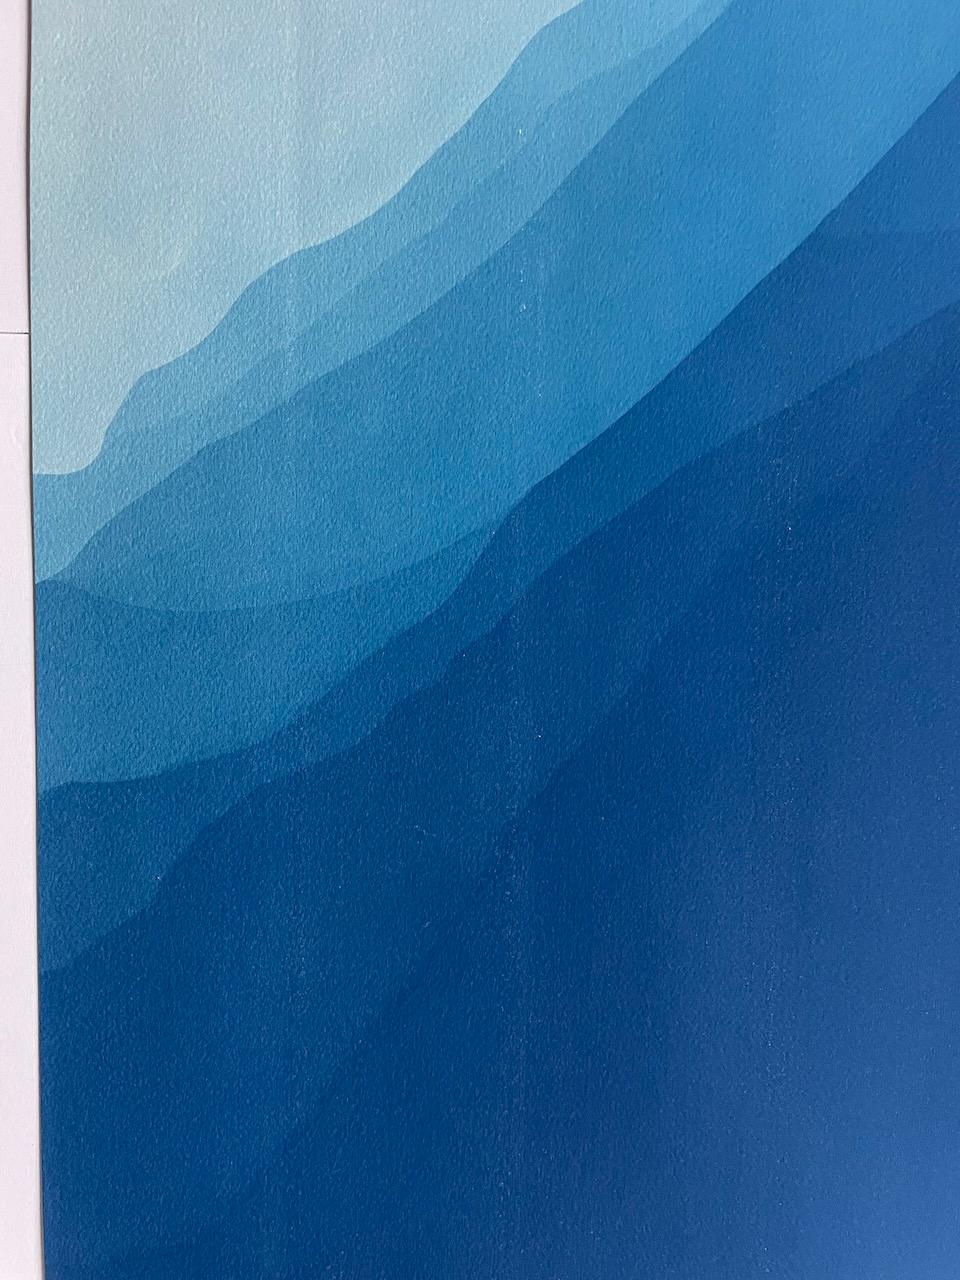 Sea Cliffs 7 (Hand-printed 40 x 20 inch abstract cyanotype) For Sale 1